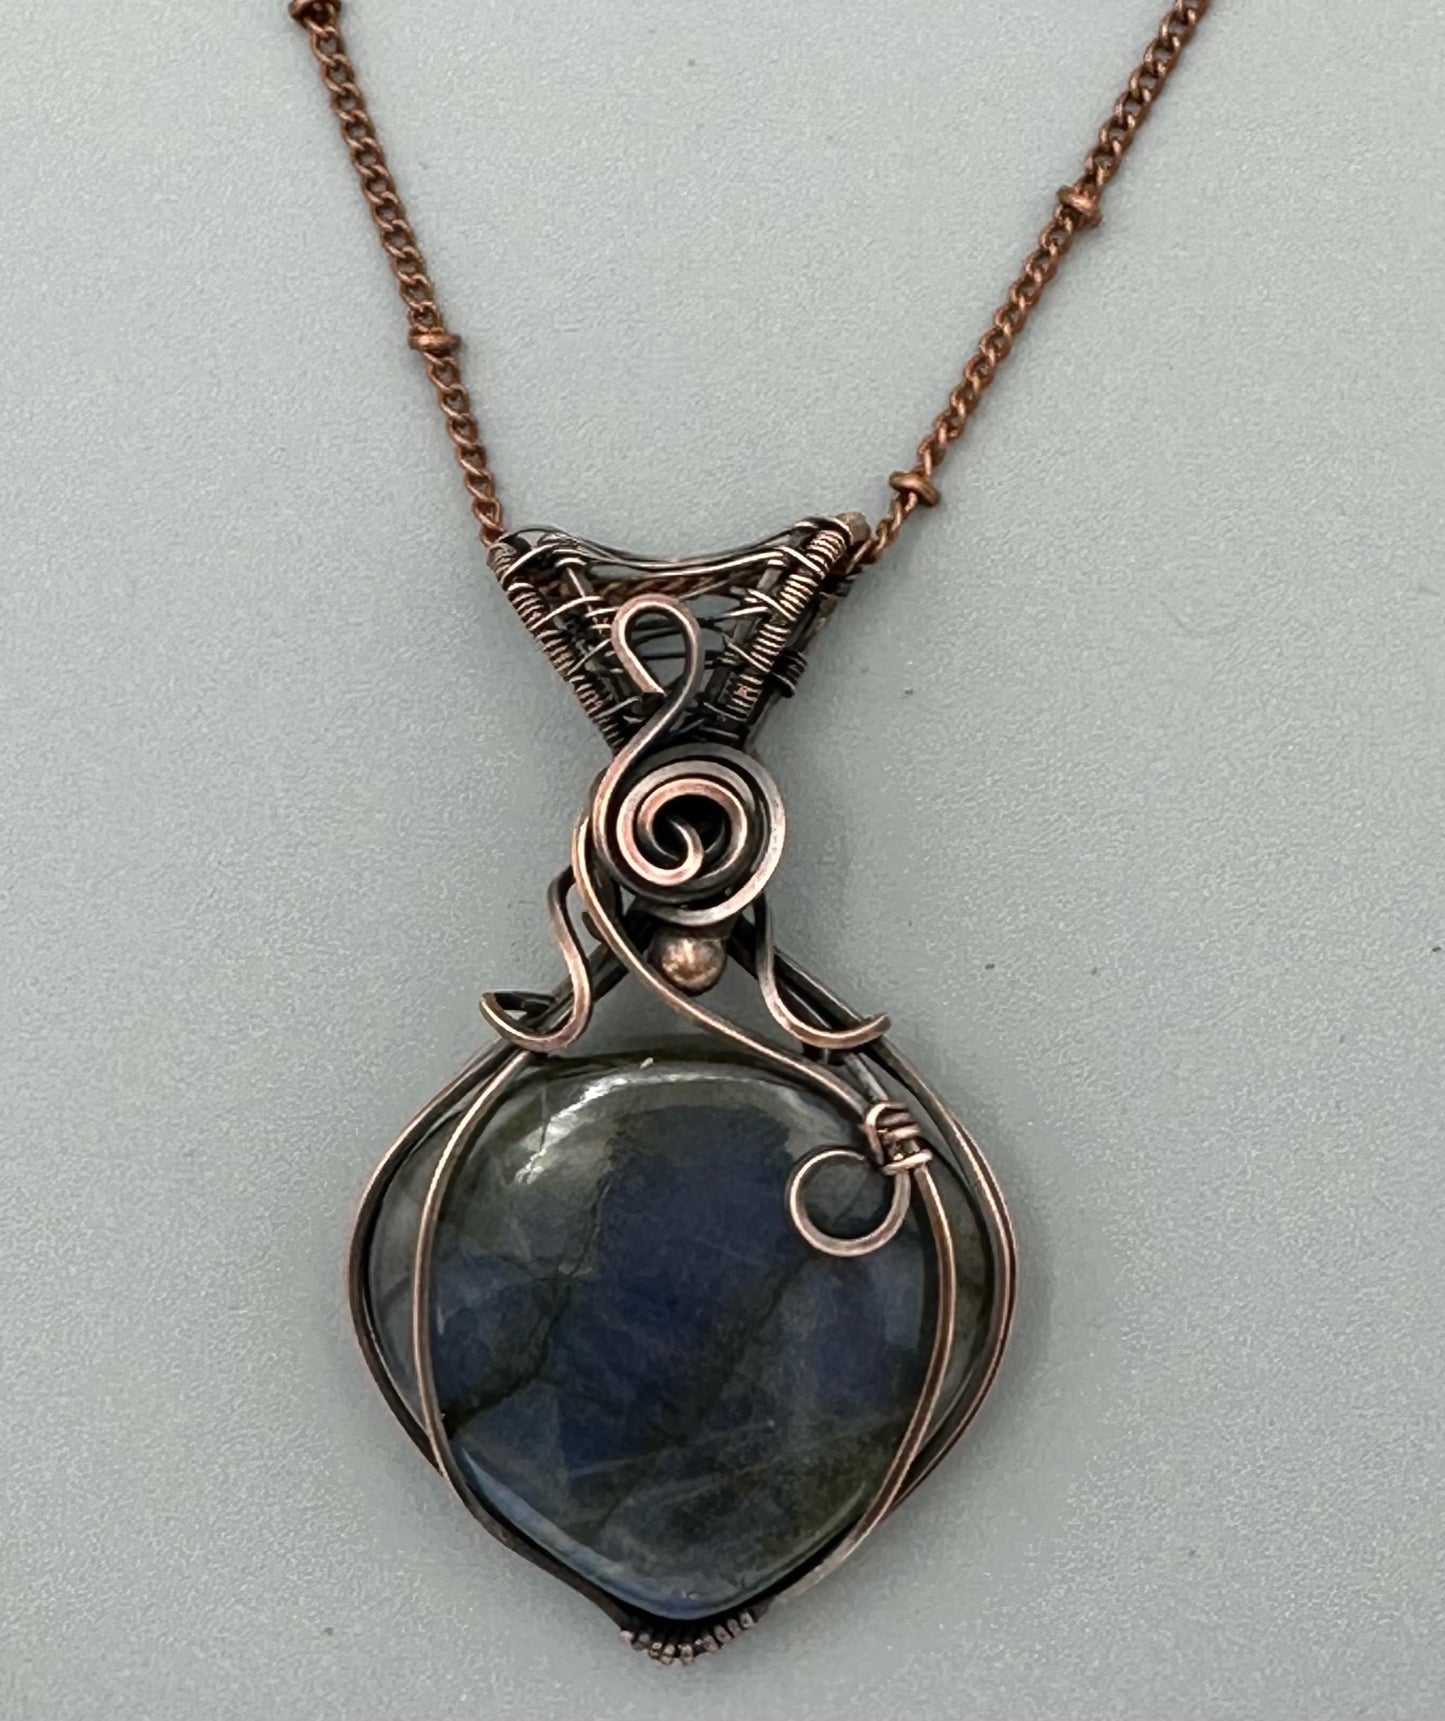 Pear Shaped Labradorite Handmade Wire Wrapped Pendant